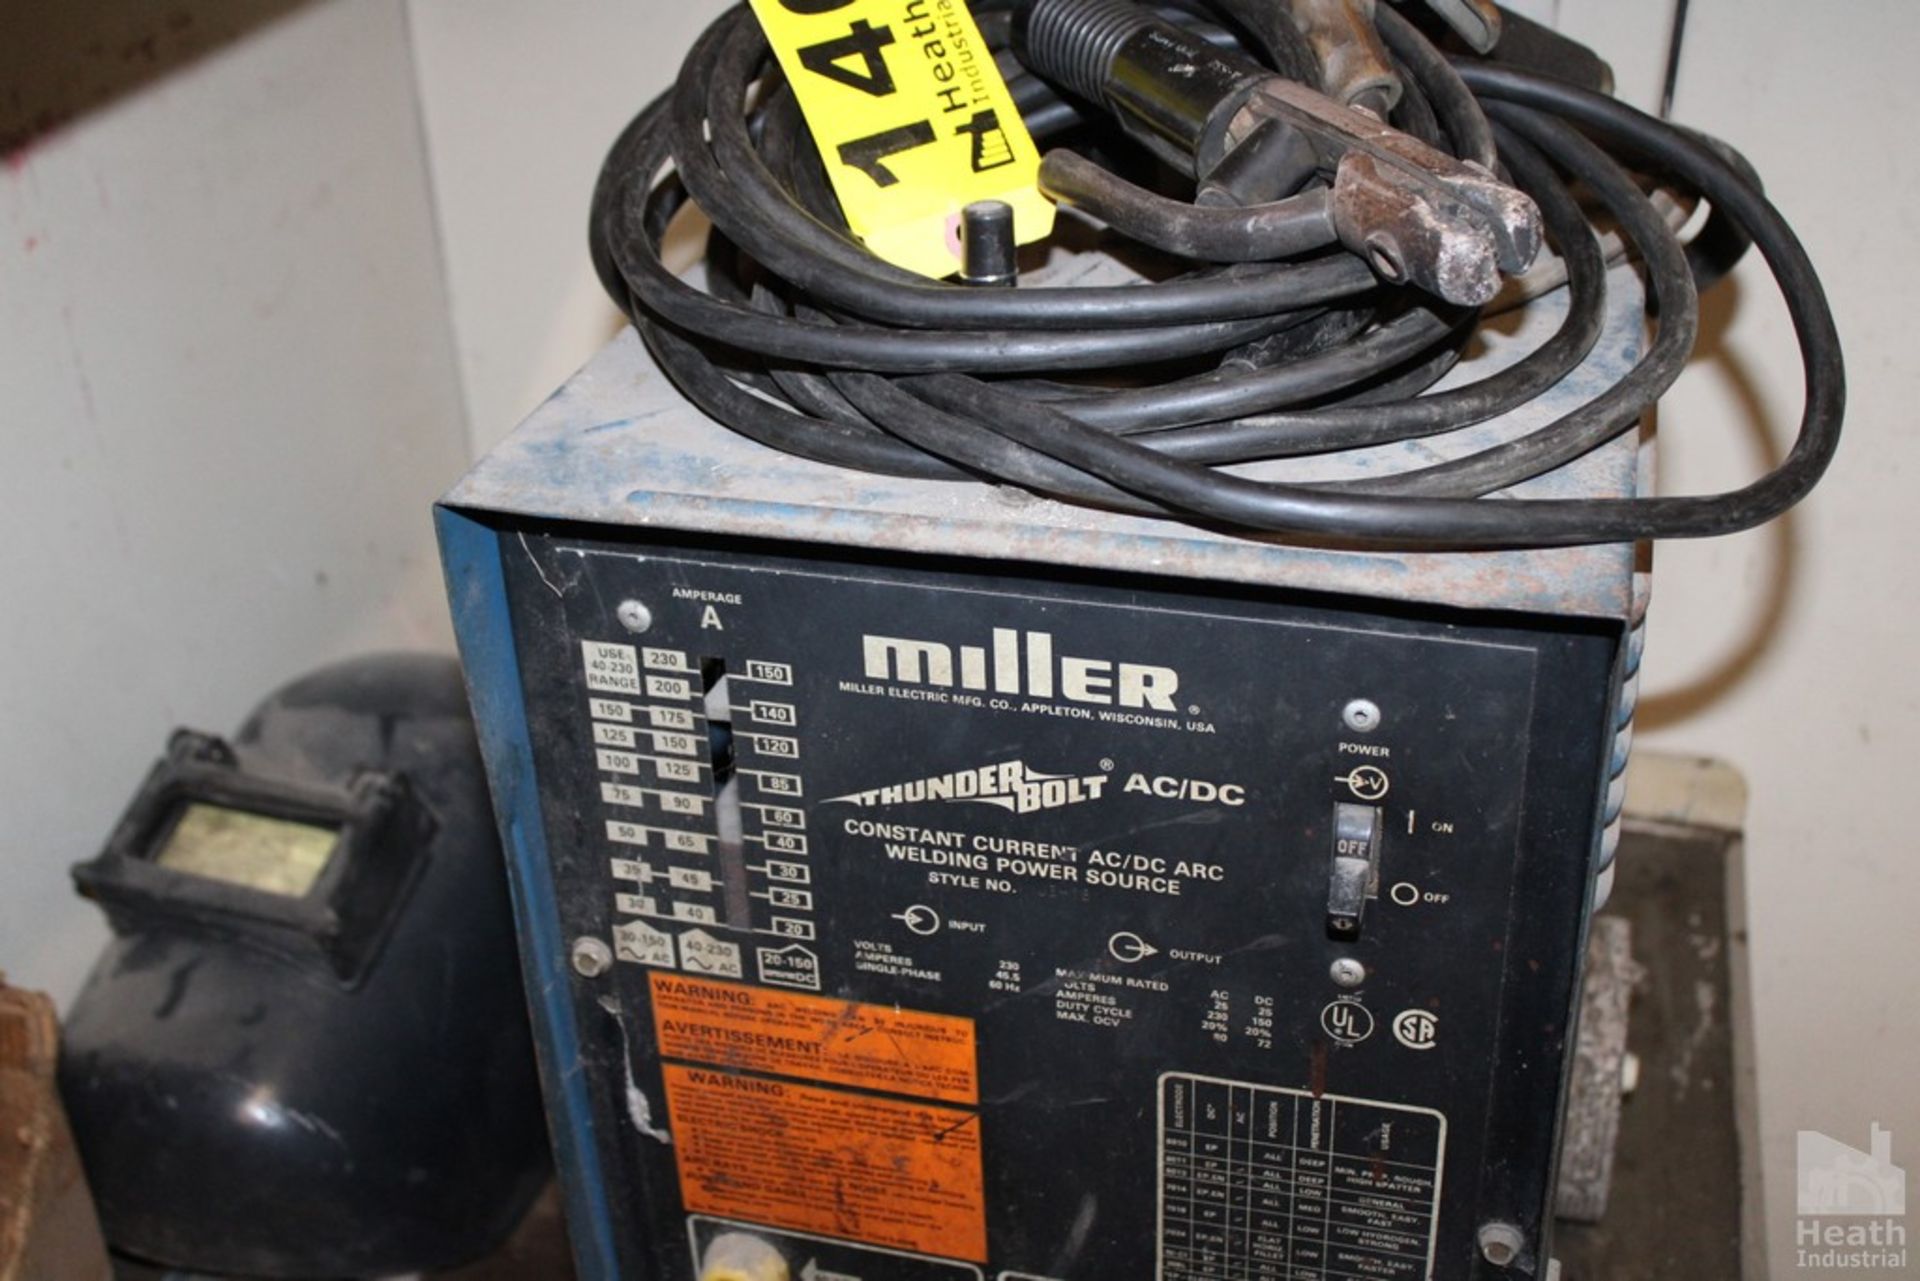 MILLER "THUNDERBOLT" AC/DC CONSTANT CURRENT AC/DC ARC WELDING POWER SOURCE - Image 2 of 3